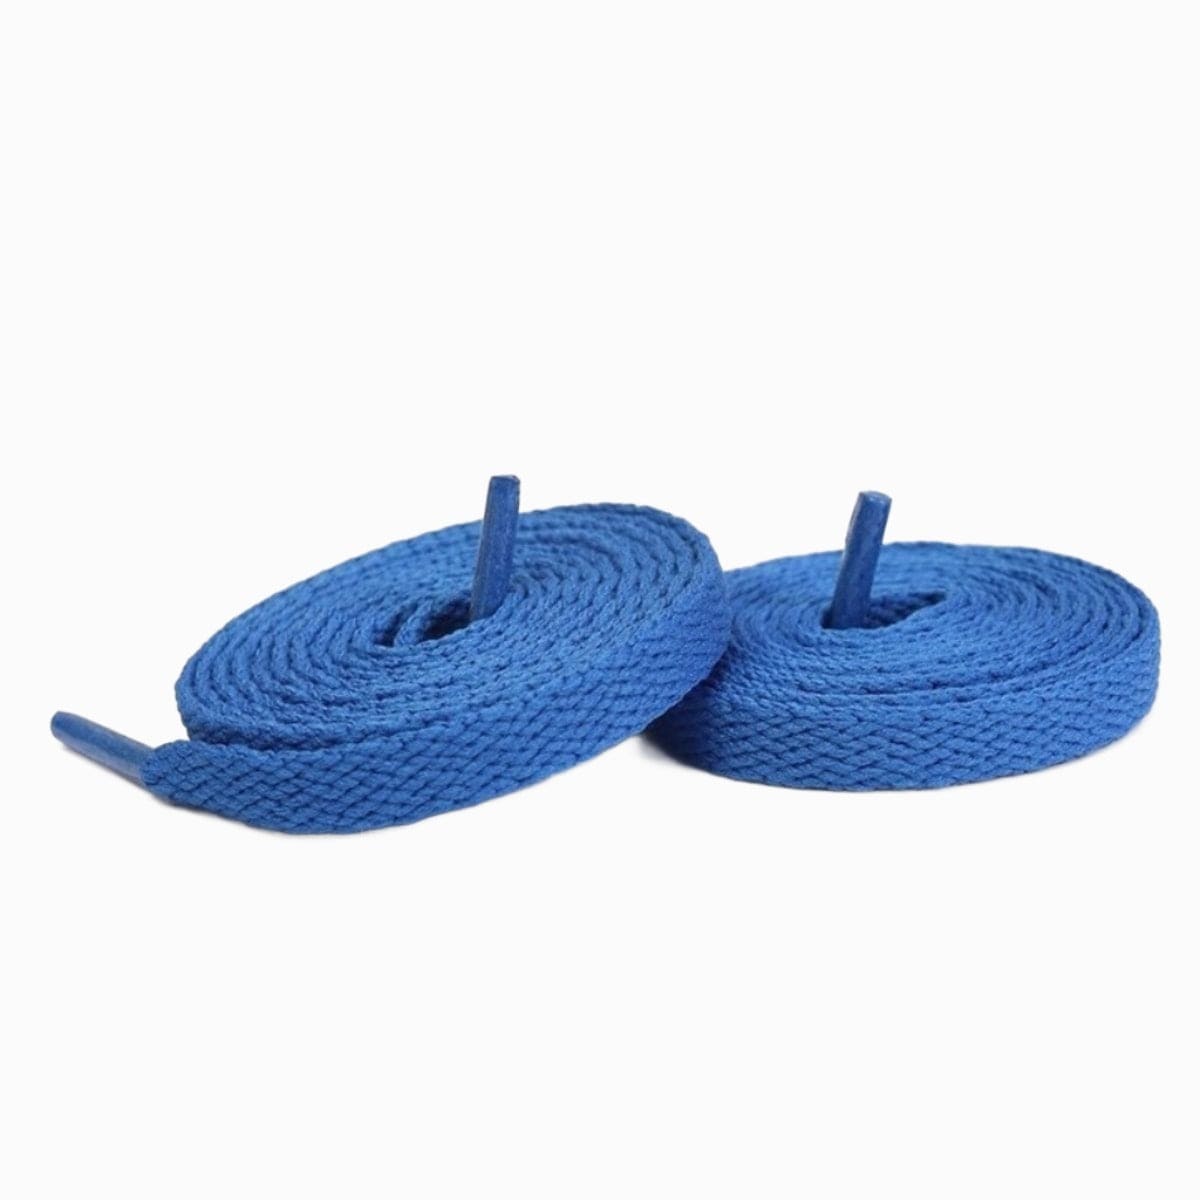 Royal Blue Replacement Adidas Shoe Laces for Adidas Handball Spezial Sneakers by Kicks Shoelaces